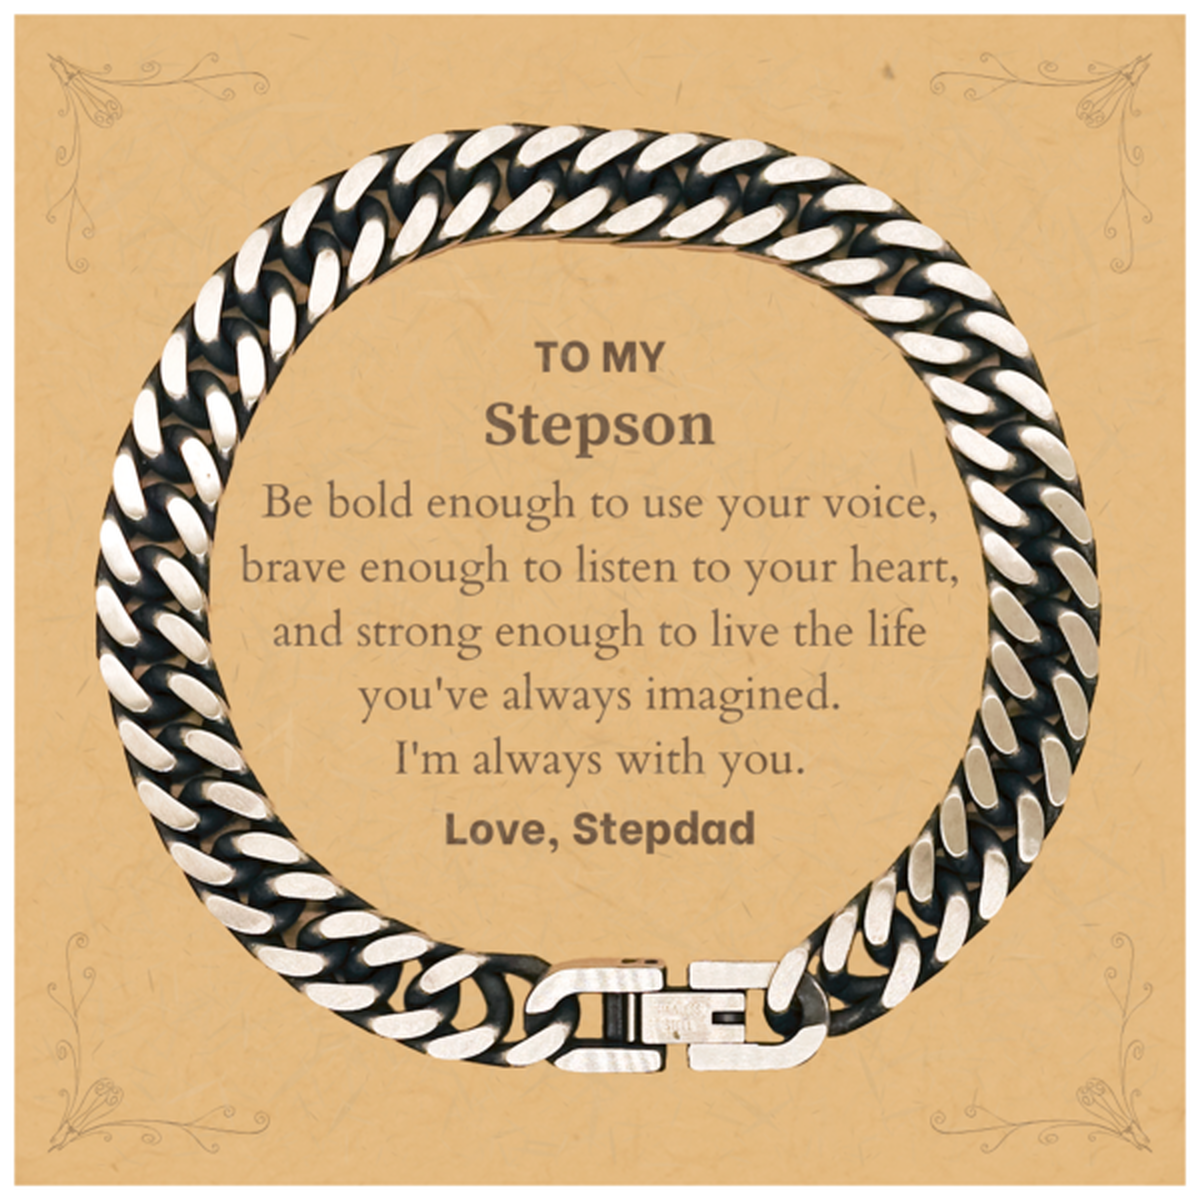 Keepsake Stepson Cuban Link Chain Bracelet Gift Idea Graduation Christmas Birthday Stepson from Stepdad, Stepson Be bold enough to use your voice, brave enough to listen to your heart. Love, Stepdad